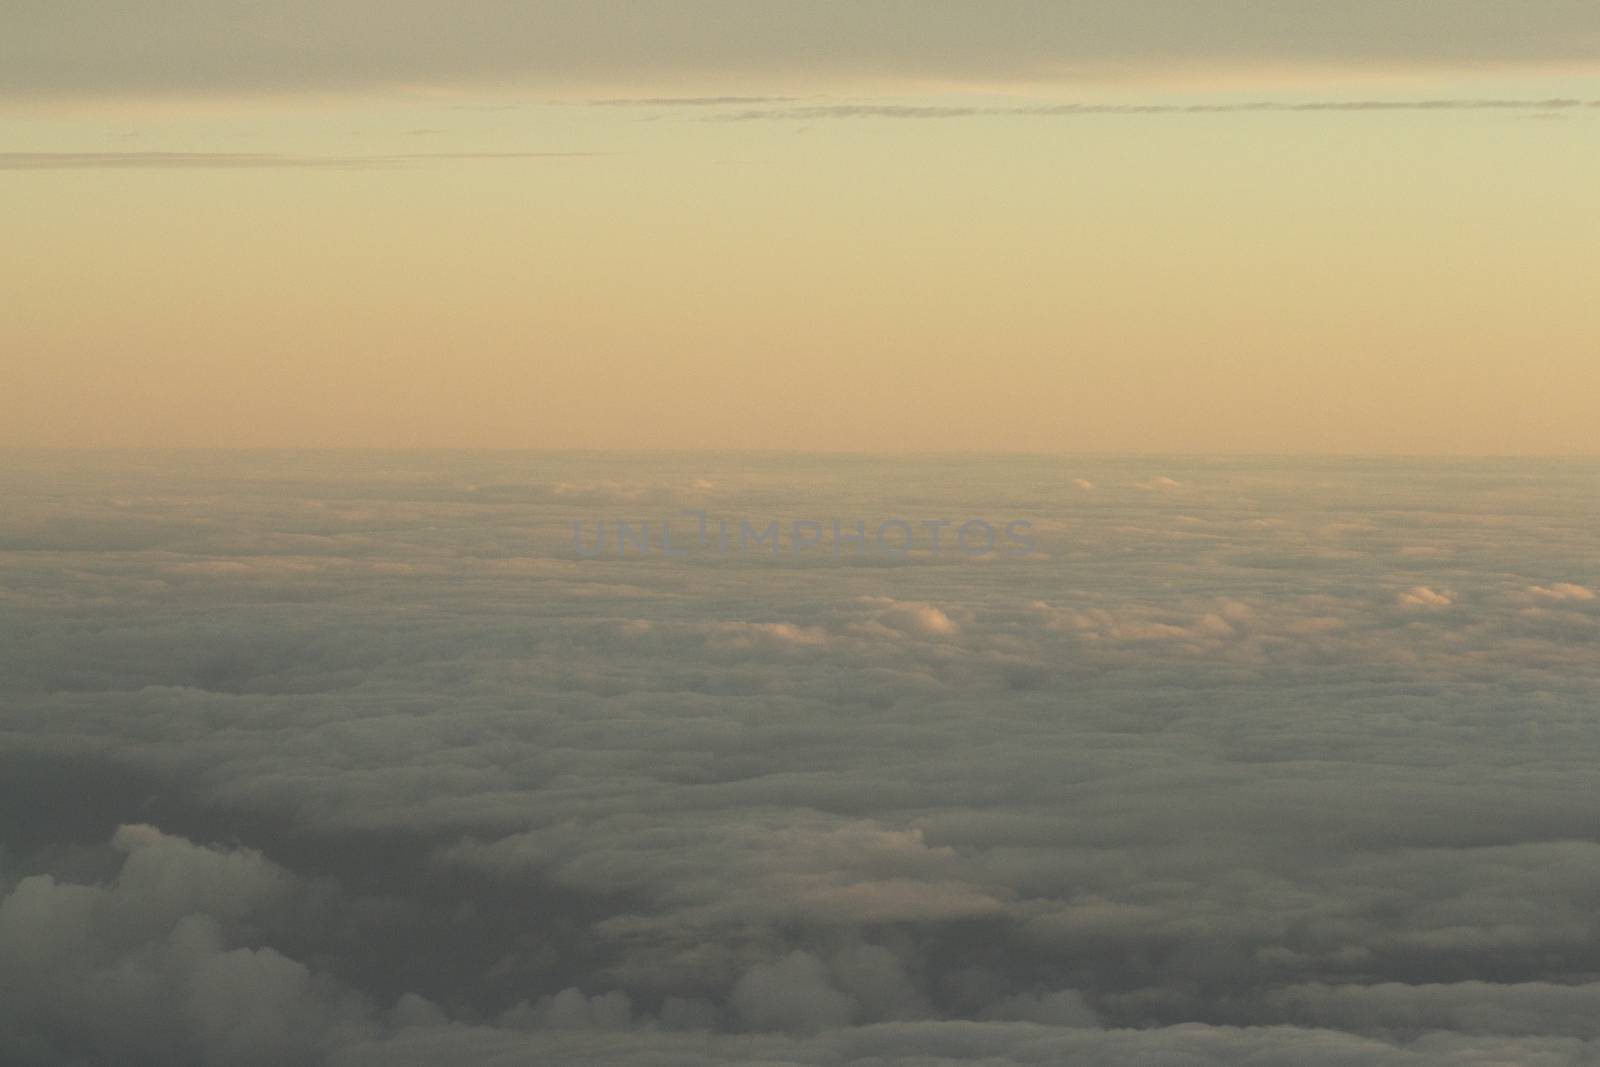 Sky with clouds in blue and pink purple sunset evening pastel colors photo shot from an airplane in flight flying above the cloud level.